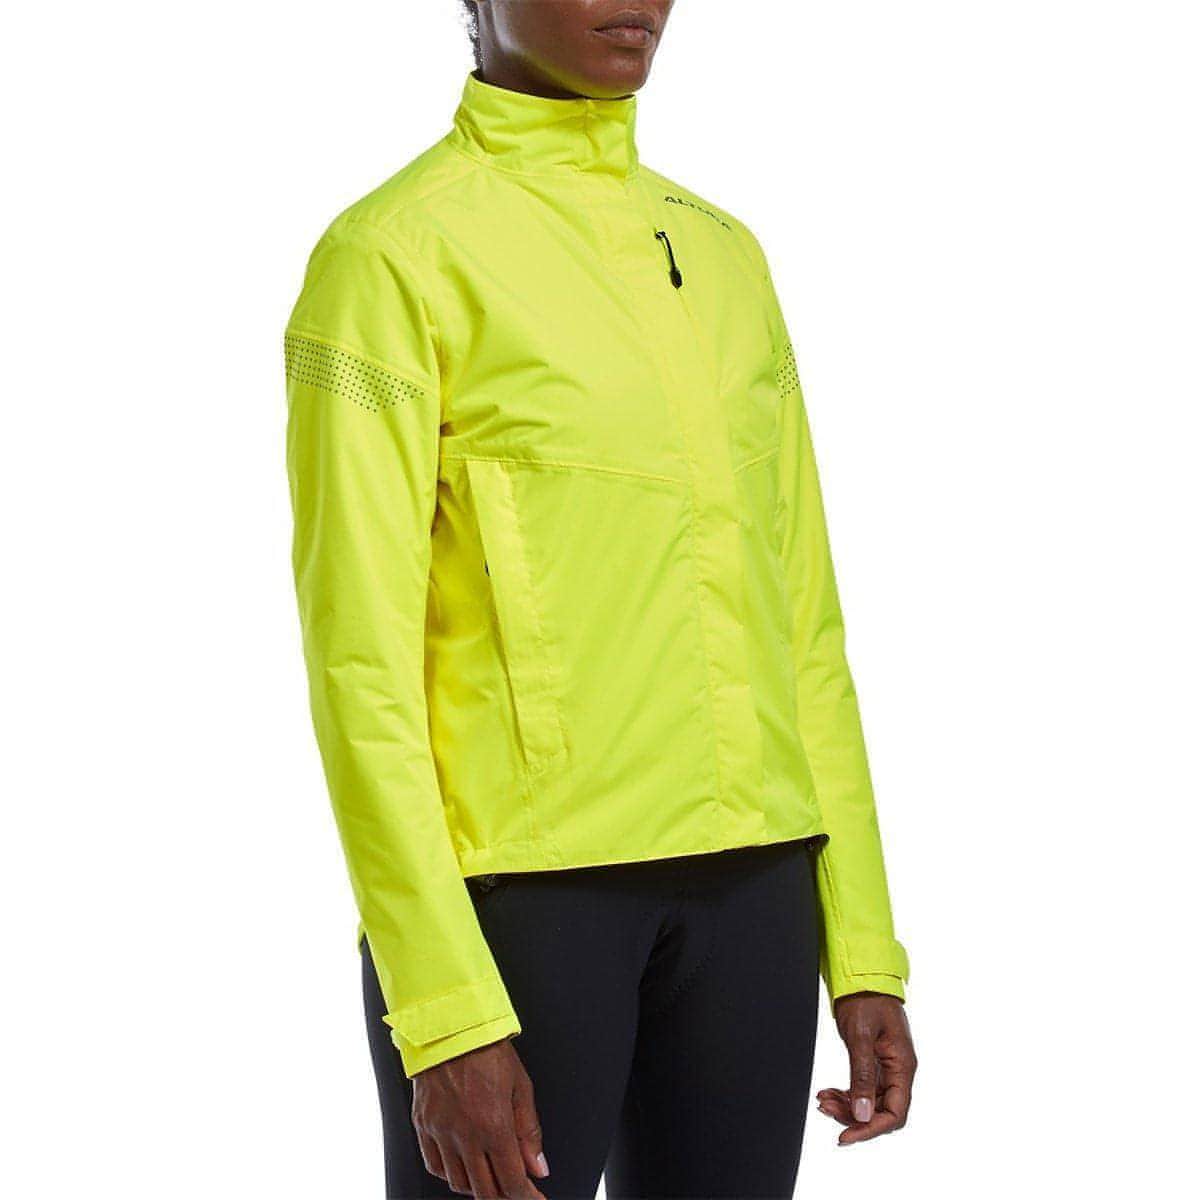 Altura Nevis Nightvision Womens Cycling Jacket - Yellow 5034948139114 - Start Fitness